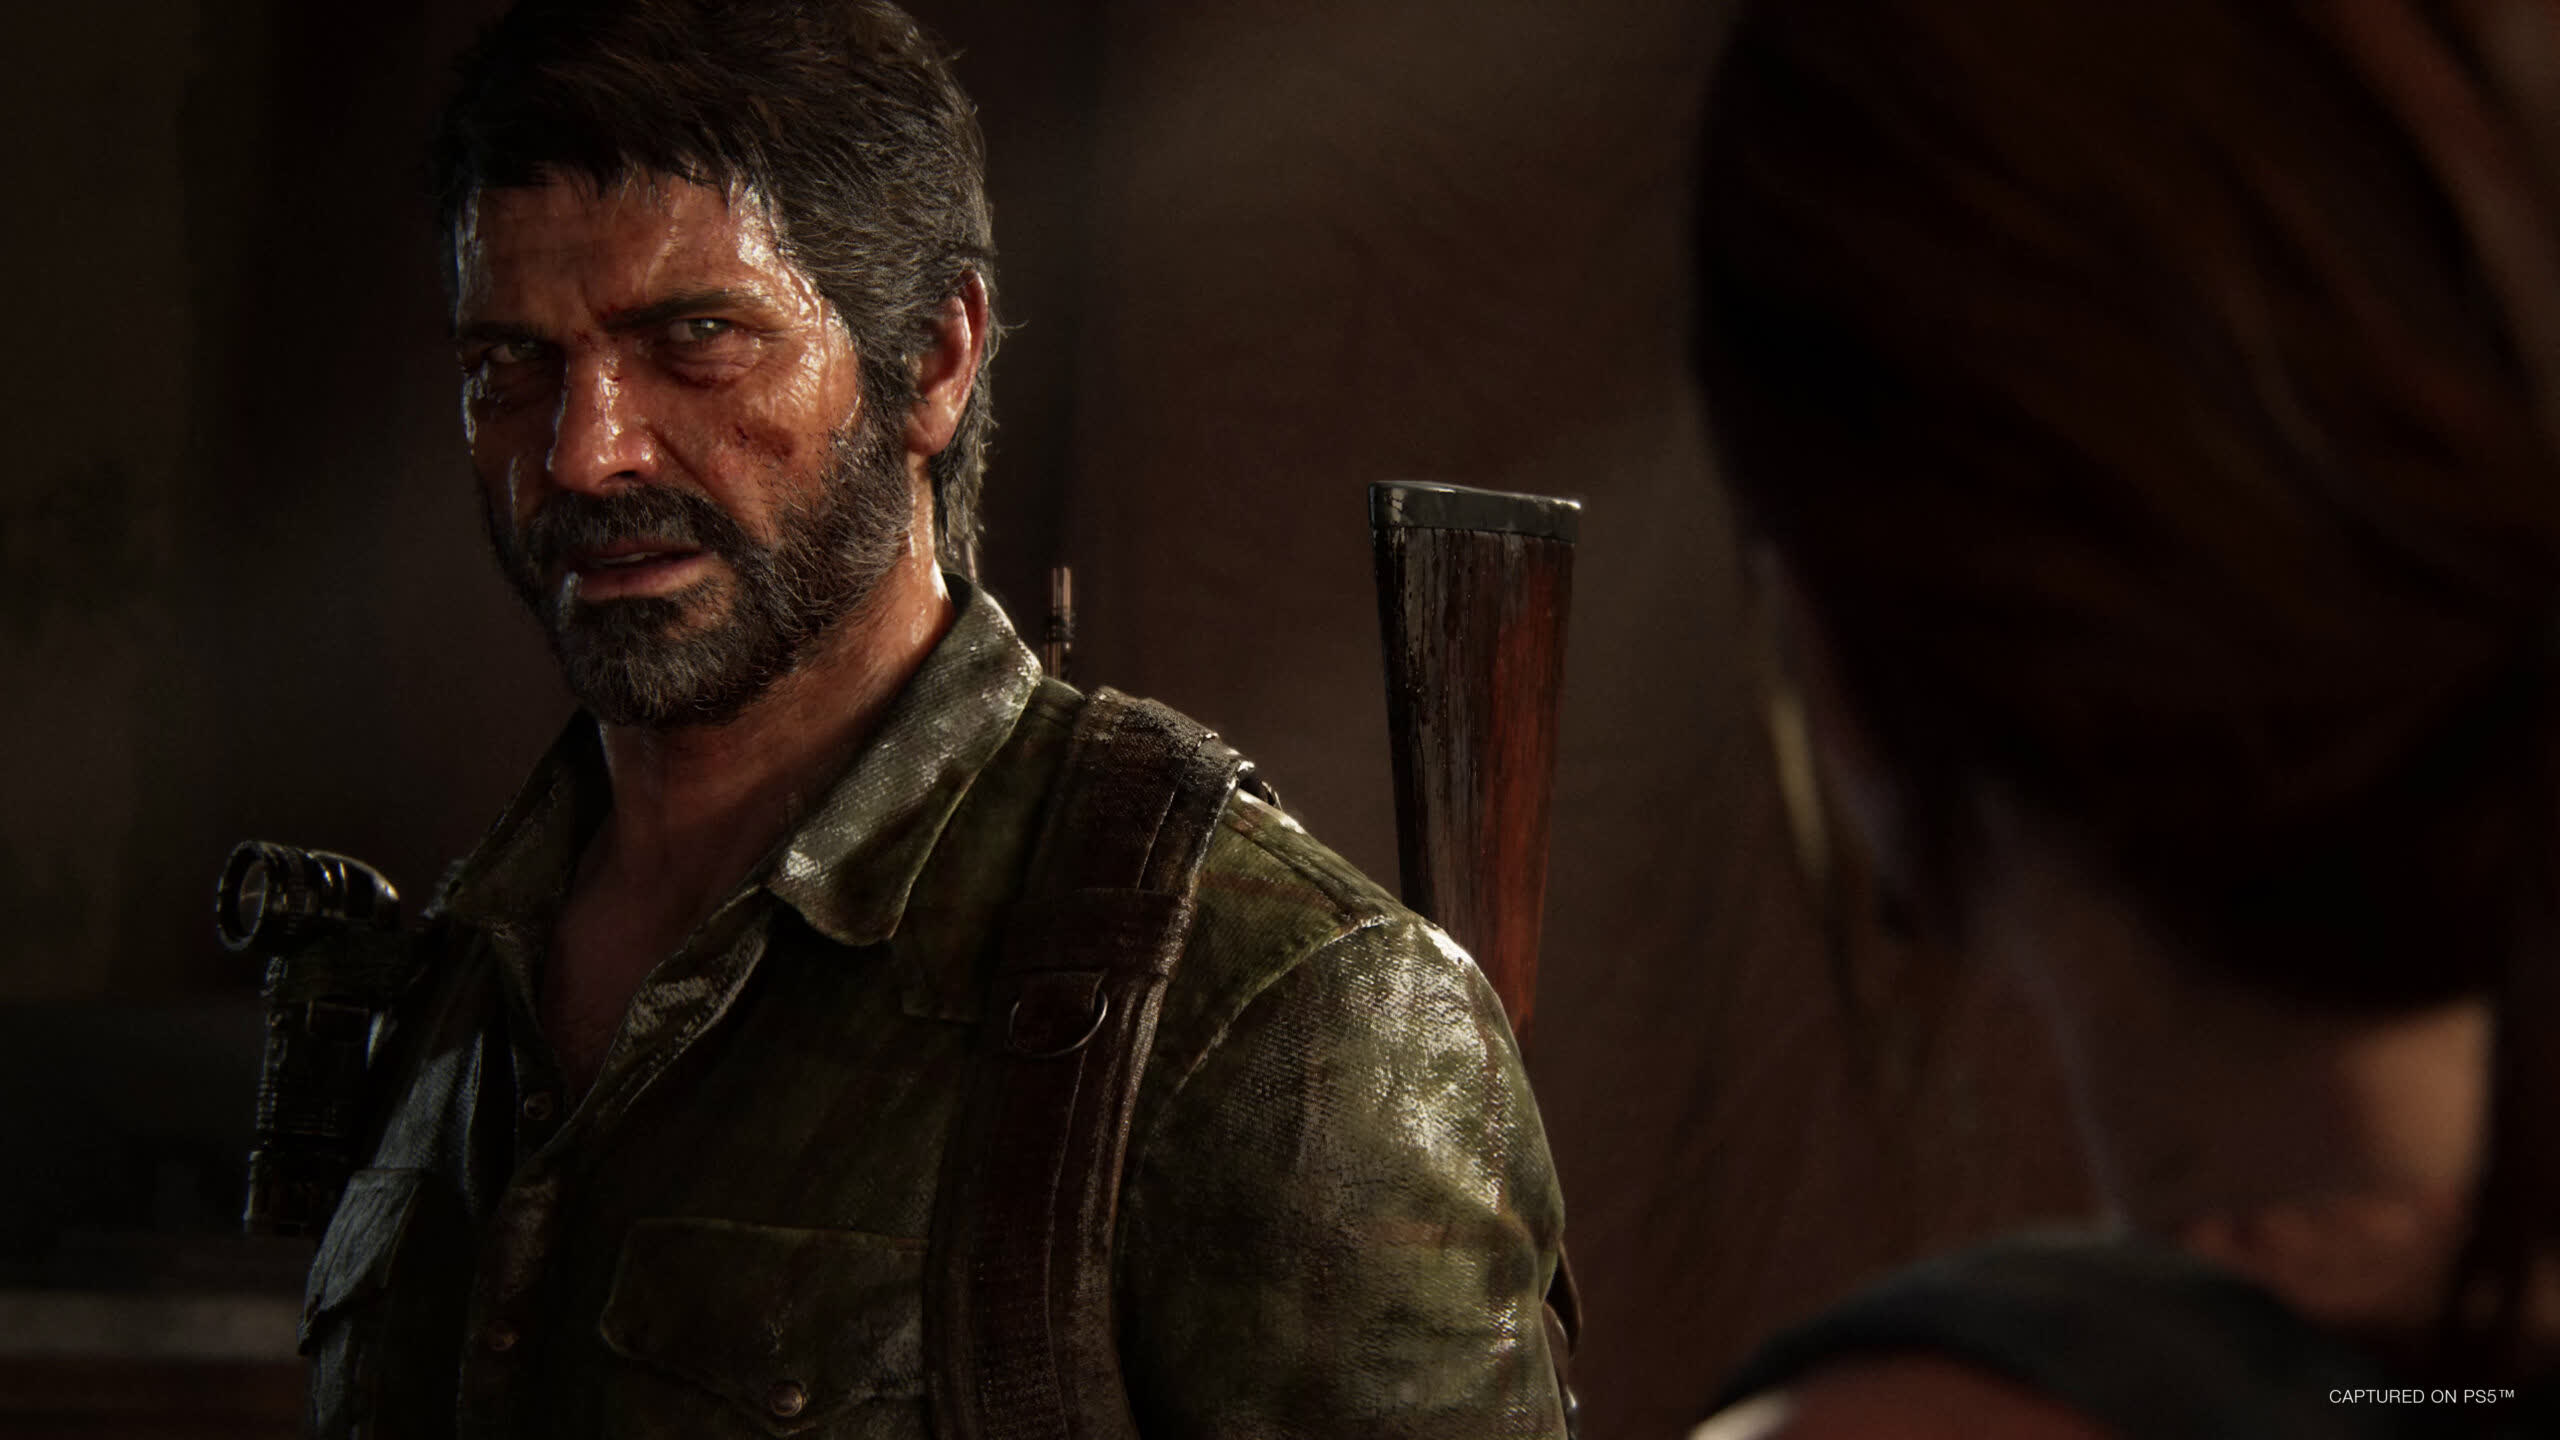 The Last of Us Part I gets March 2023 PC launch date